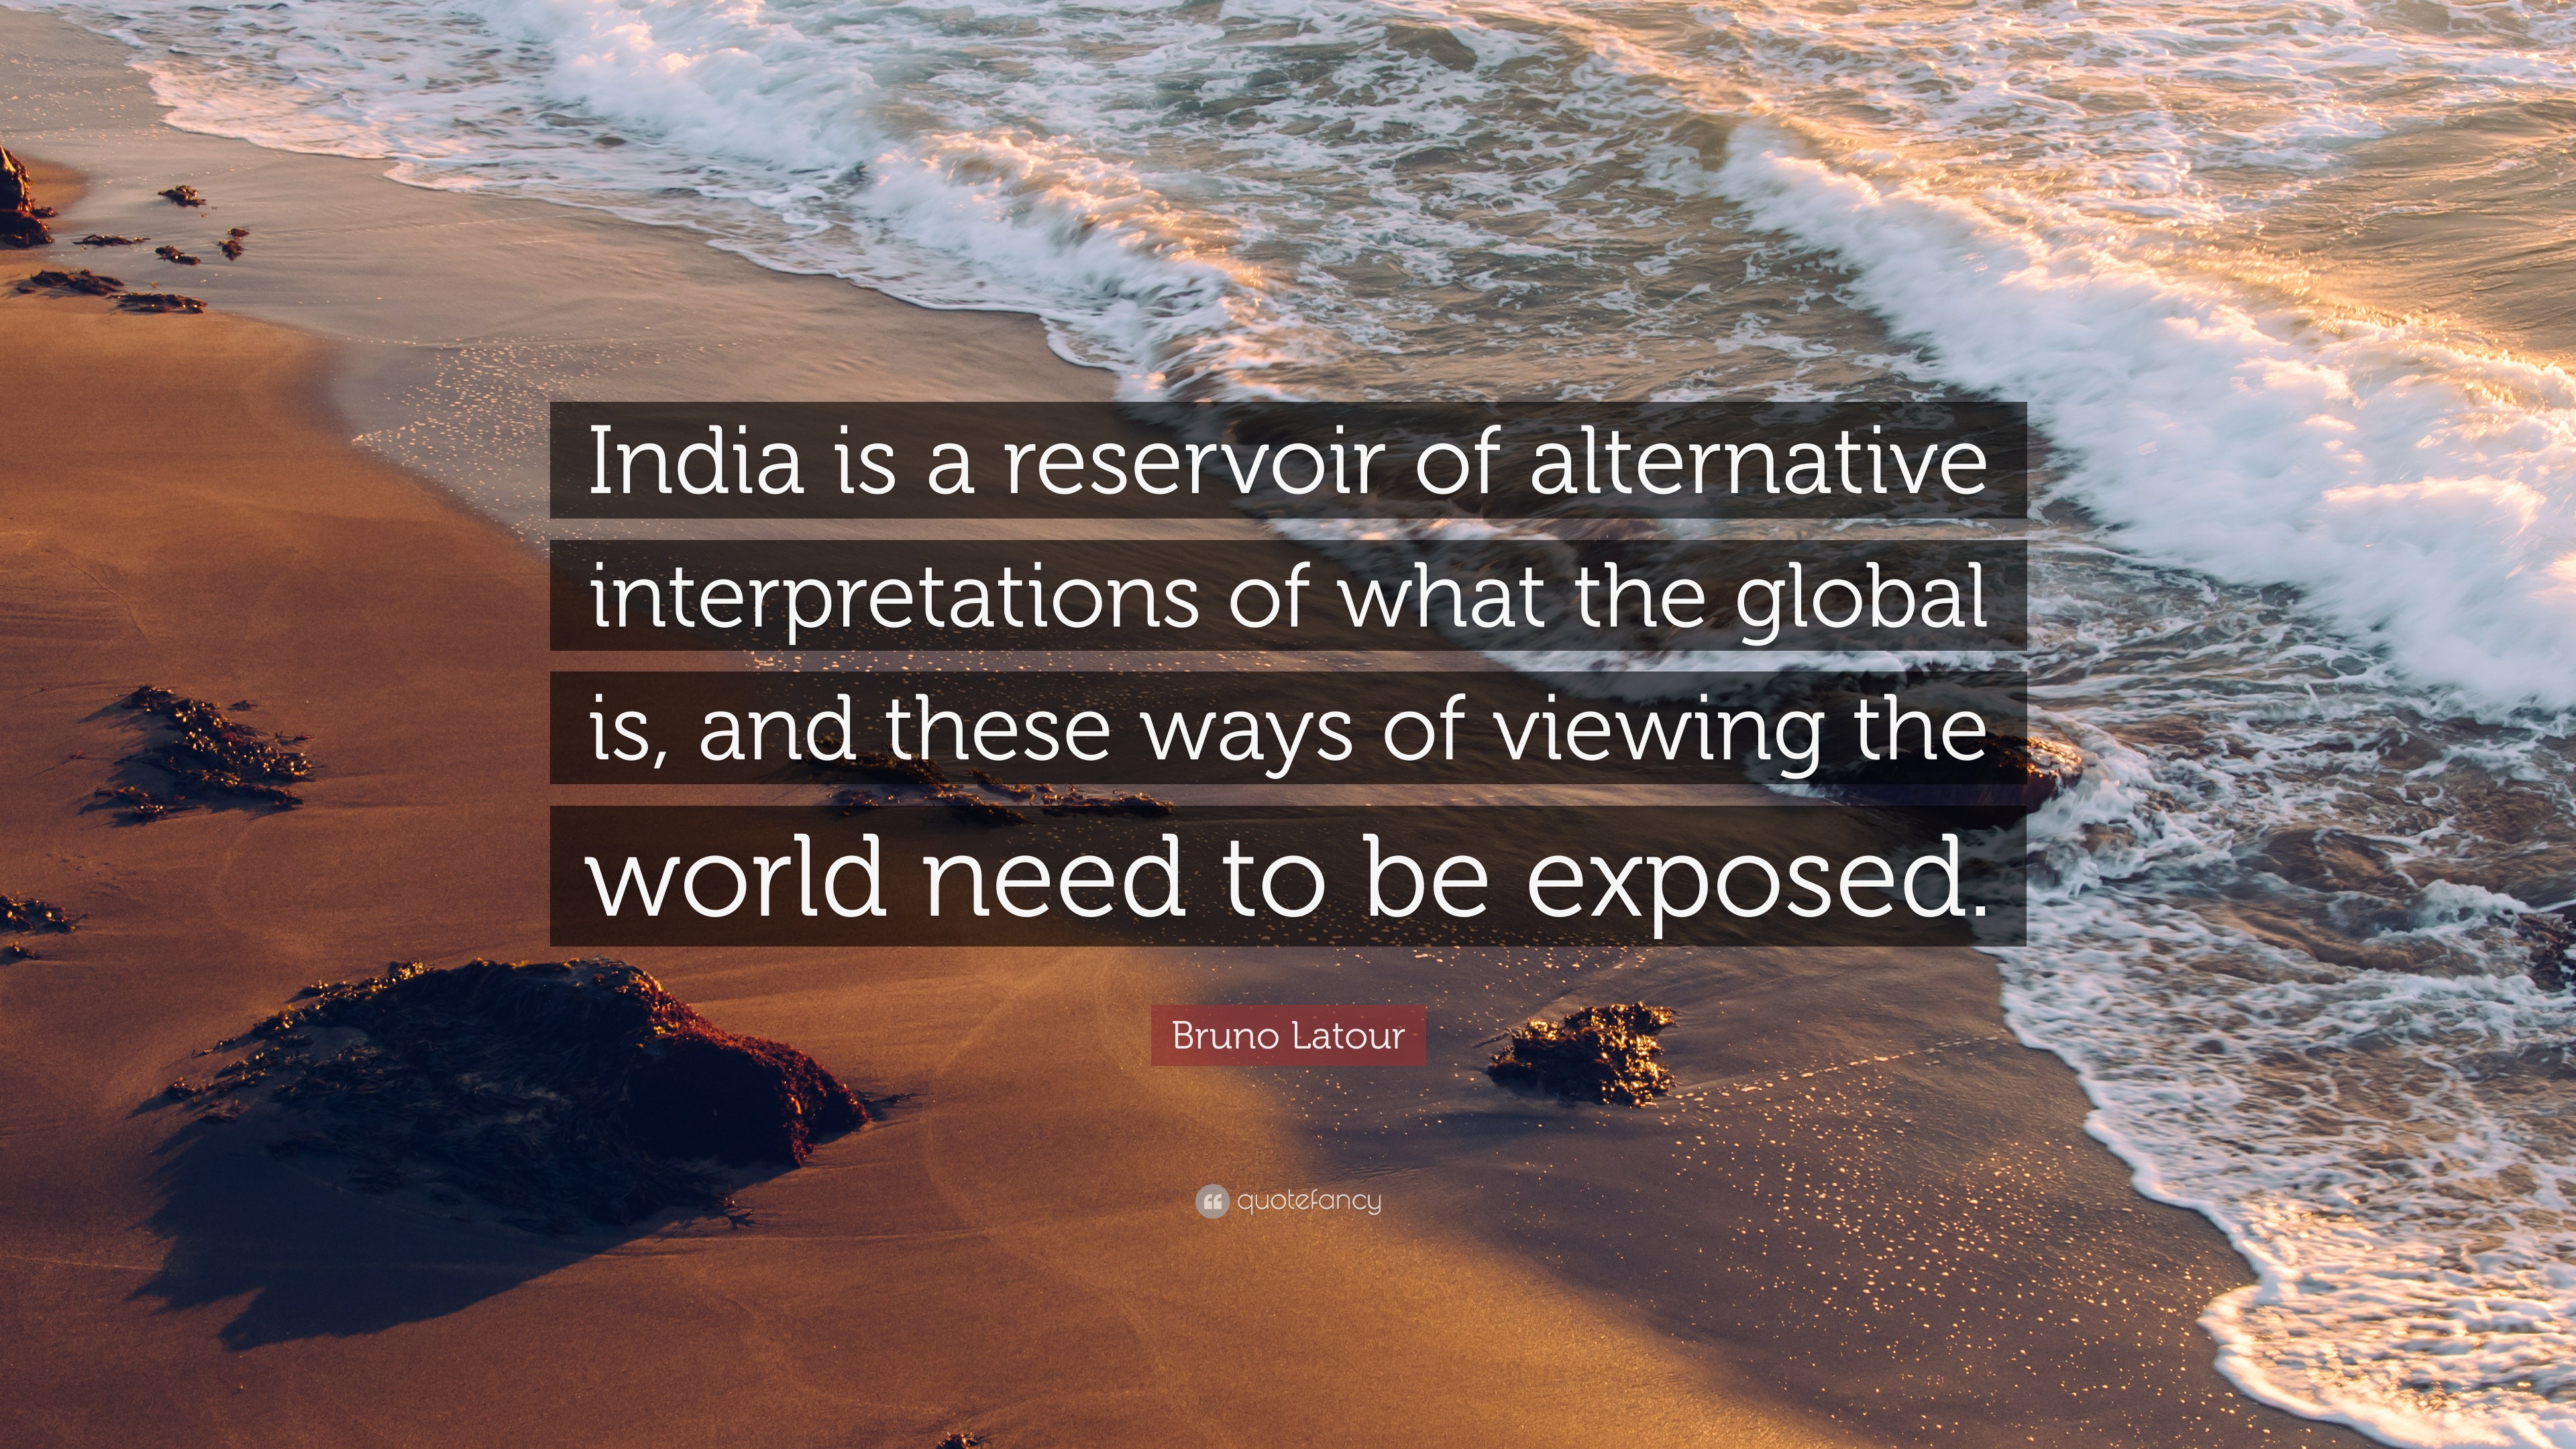 Bruno Latour Quote: “India is a reservoir of alternative interpretations of  what the global is, and these ways of viewing the world need to b...”